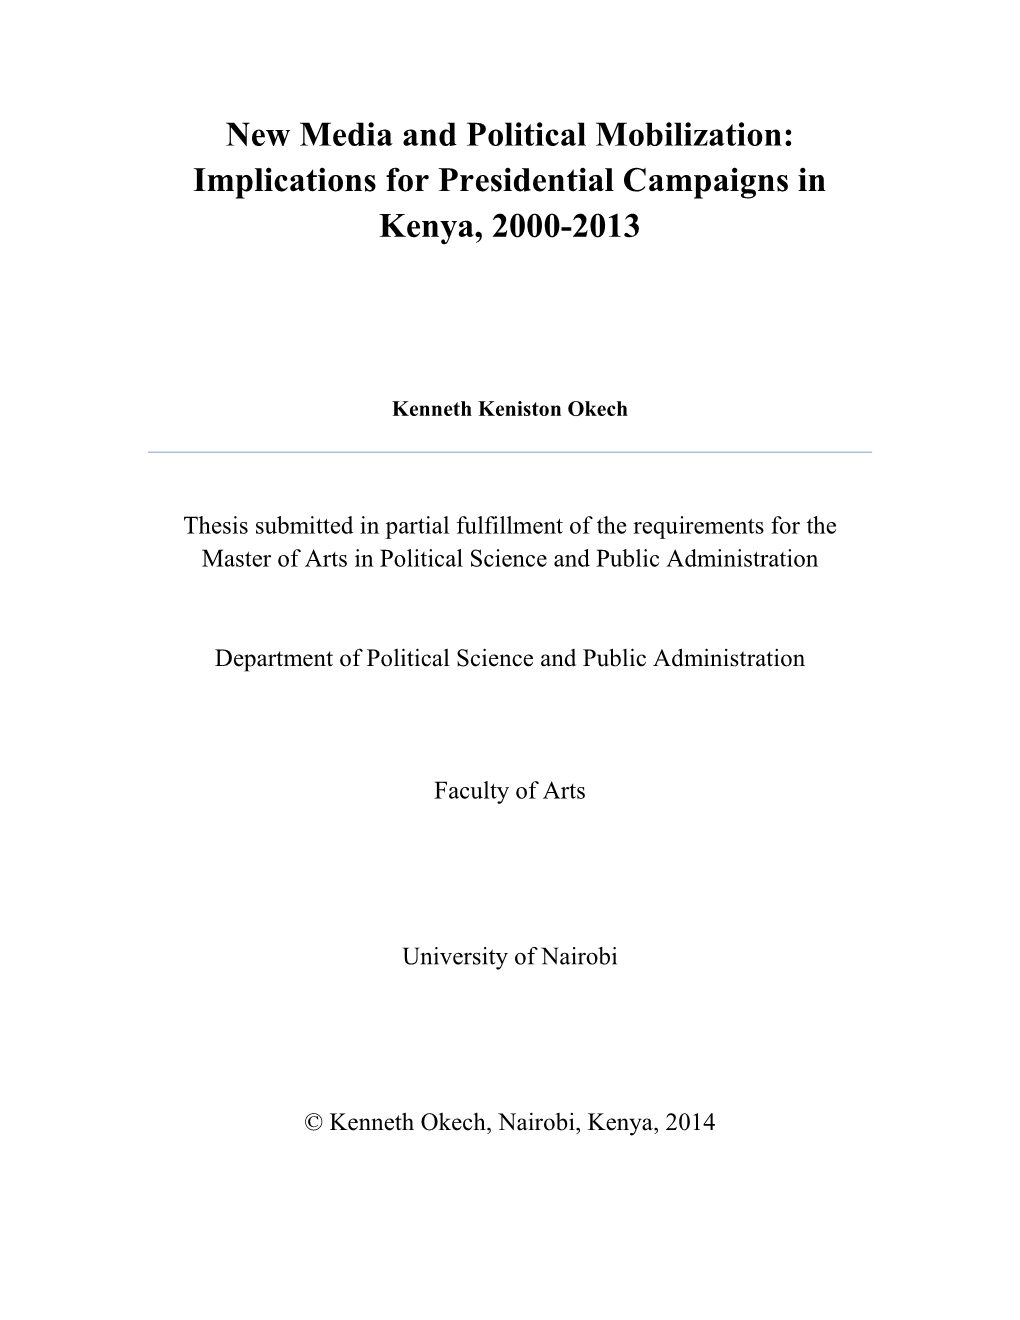 New Media and Political Mobilization:Implications For